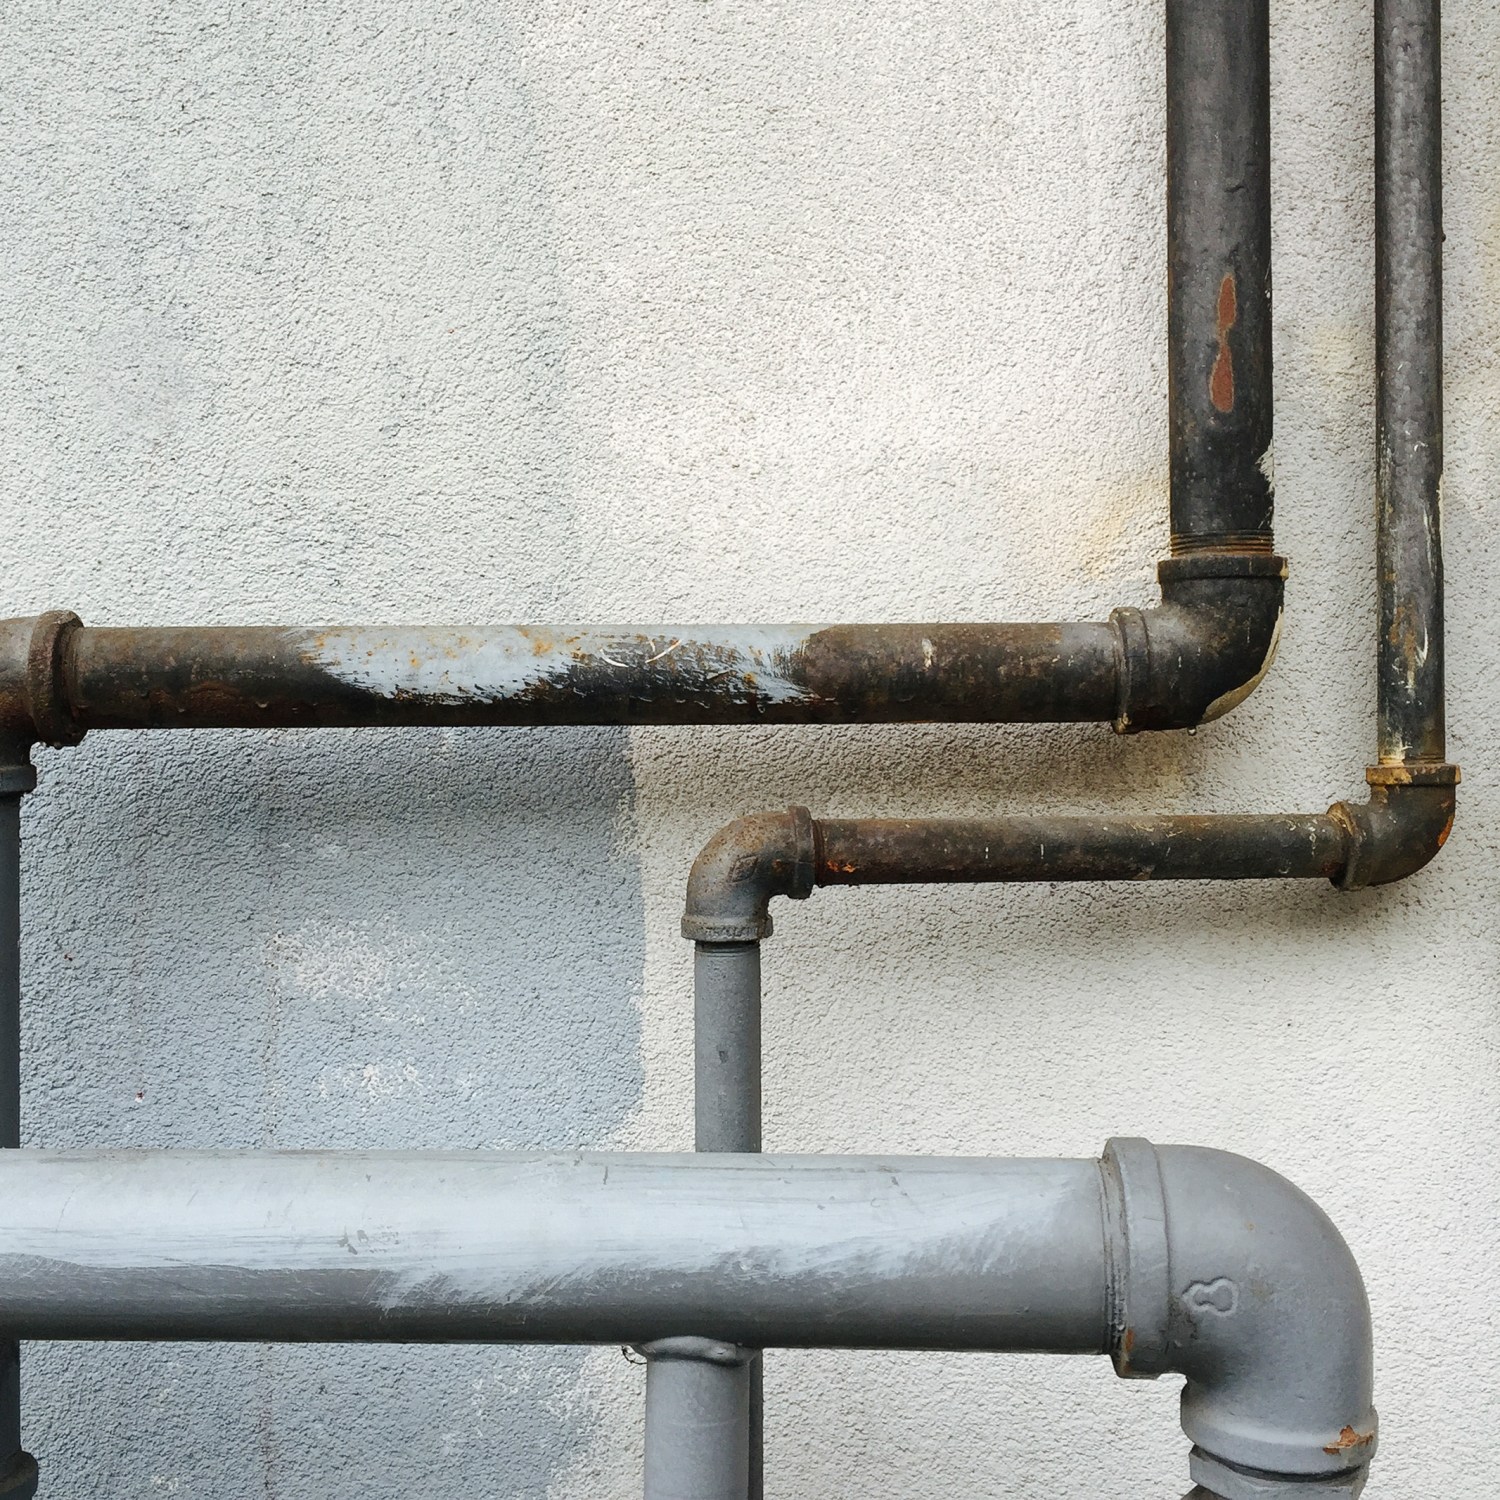 Pipes running through a home